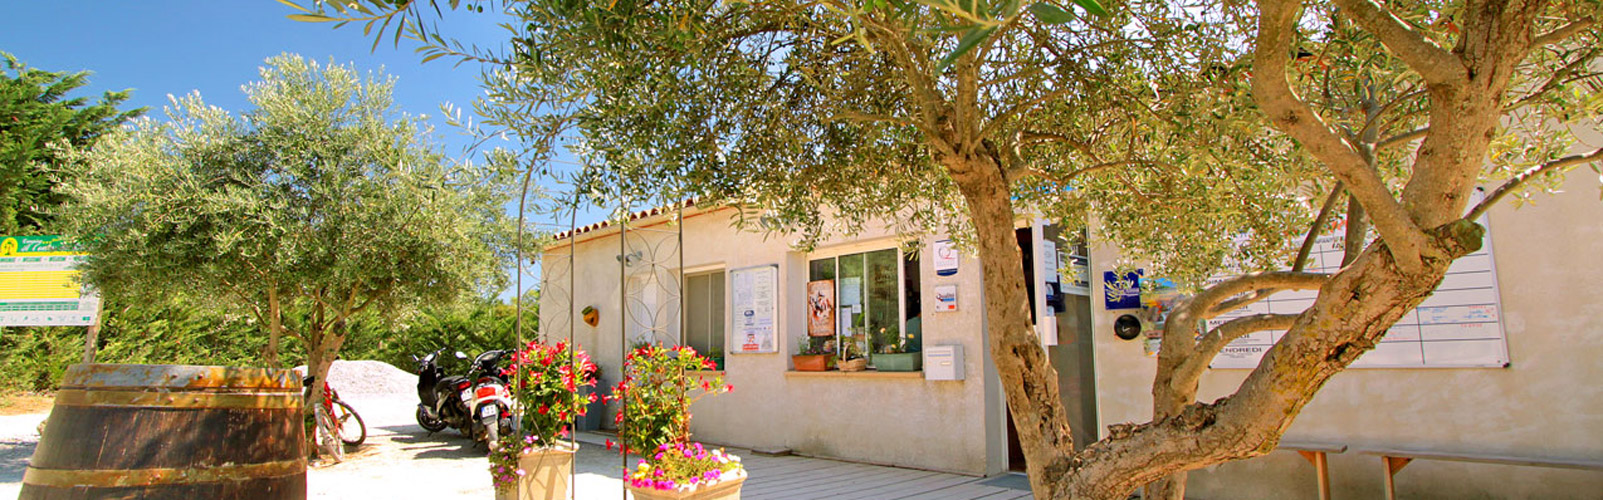 camping-aude-services-3-etoiles